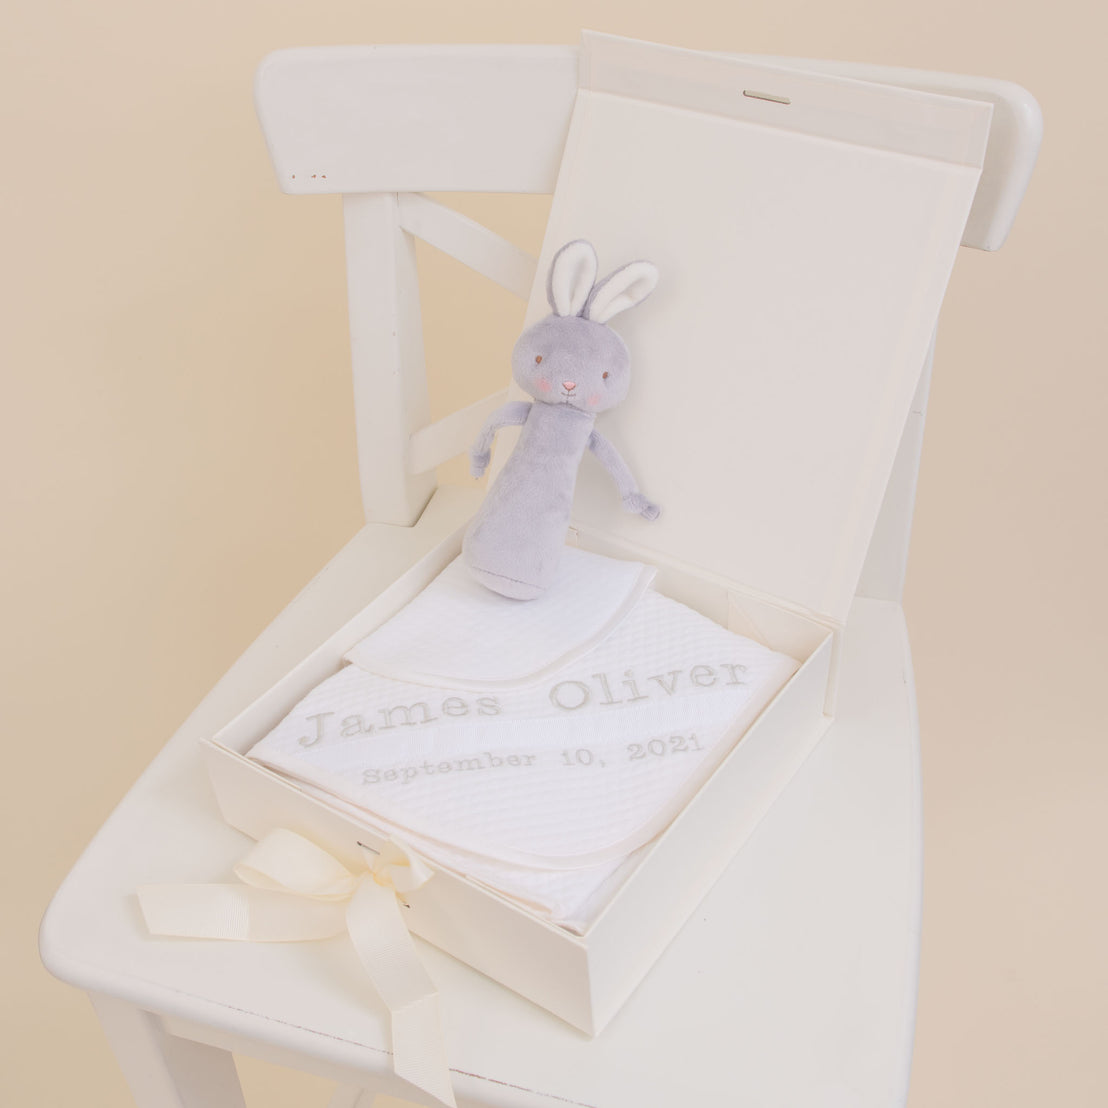 A plush bunny sits on a white chair next to an open Baby Boy Personalized Gift Set with a baby's name and date, "james oliver september 10, 2021," lined with cream by Baby Beau & Belle.